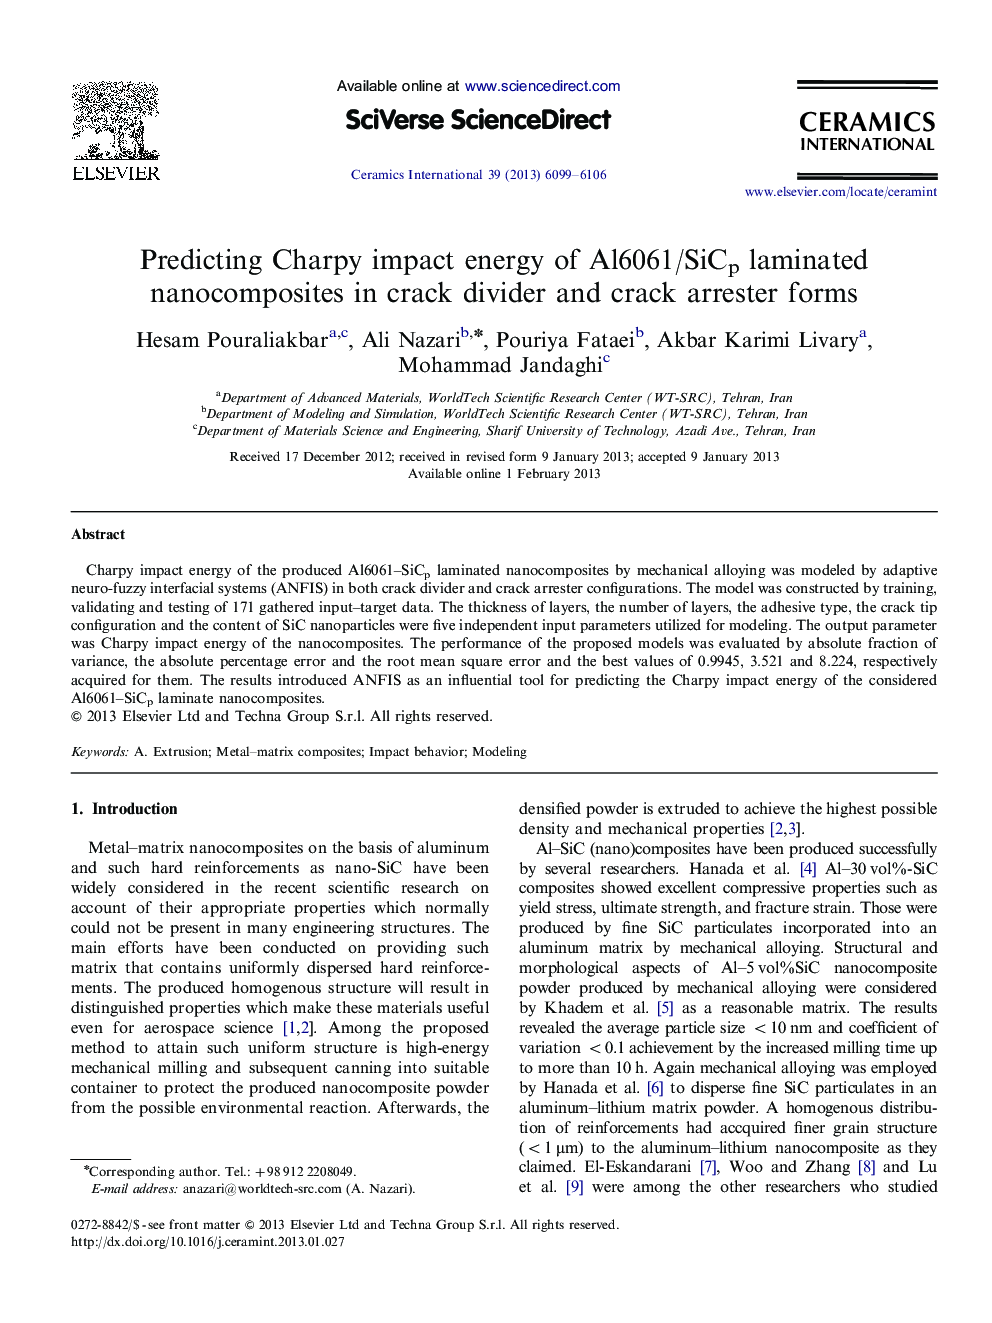 Predicting Charpy impact energy of Al6061/SiCp laminated nanocomposites in crack divider and crack arrester forms